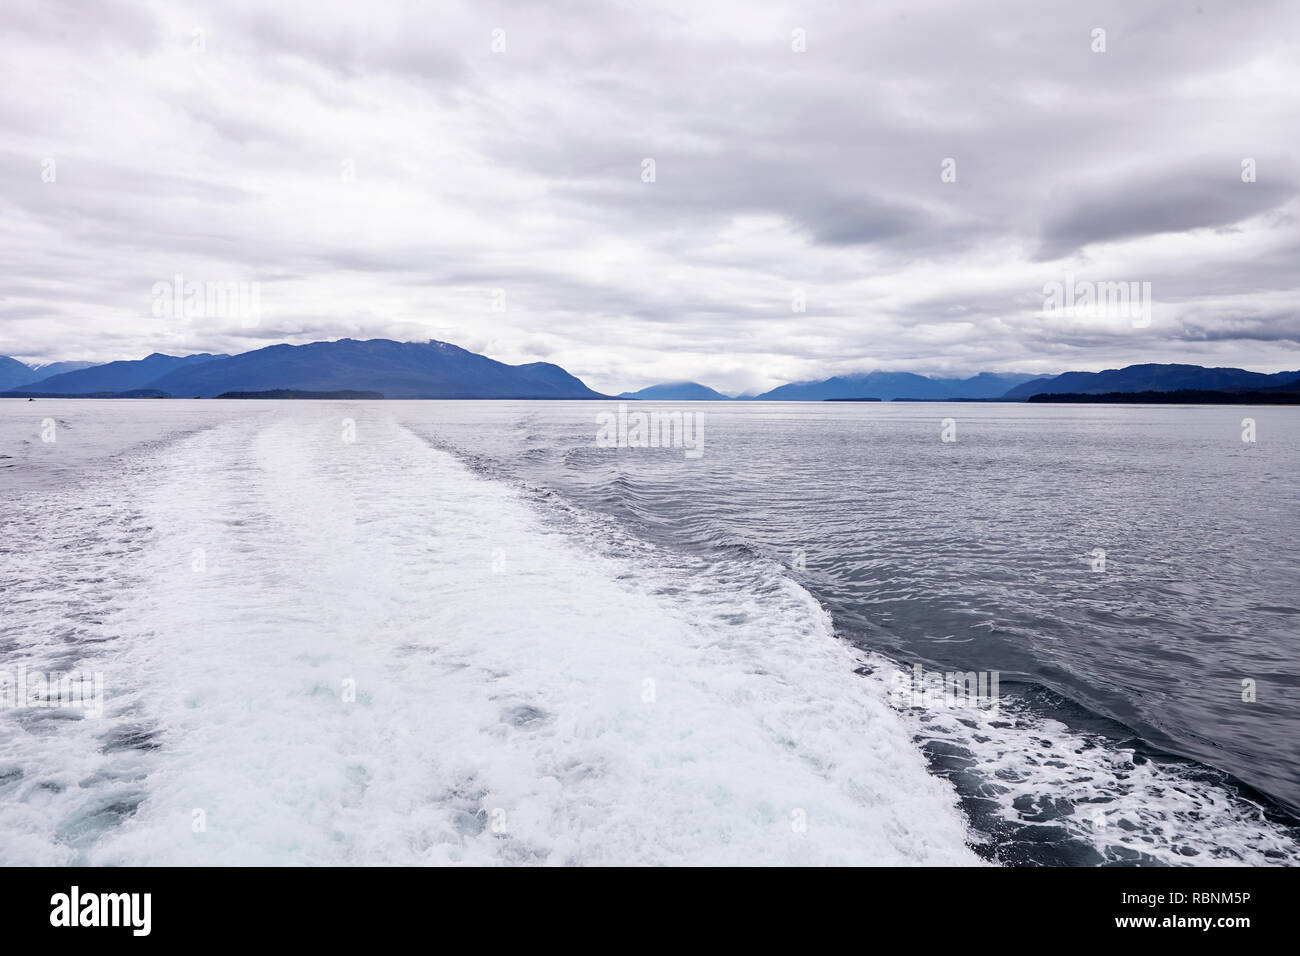 Wake Of Boat On Lake In Alaska Surrounded By Mountains And Forests Stock Photo